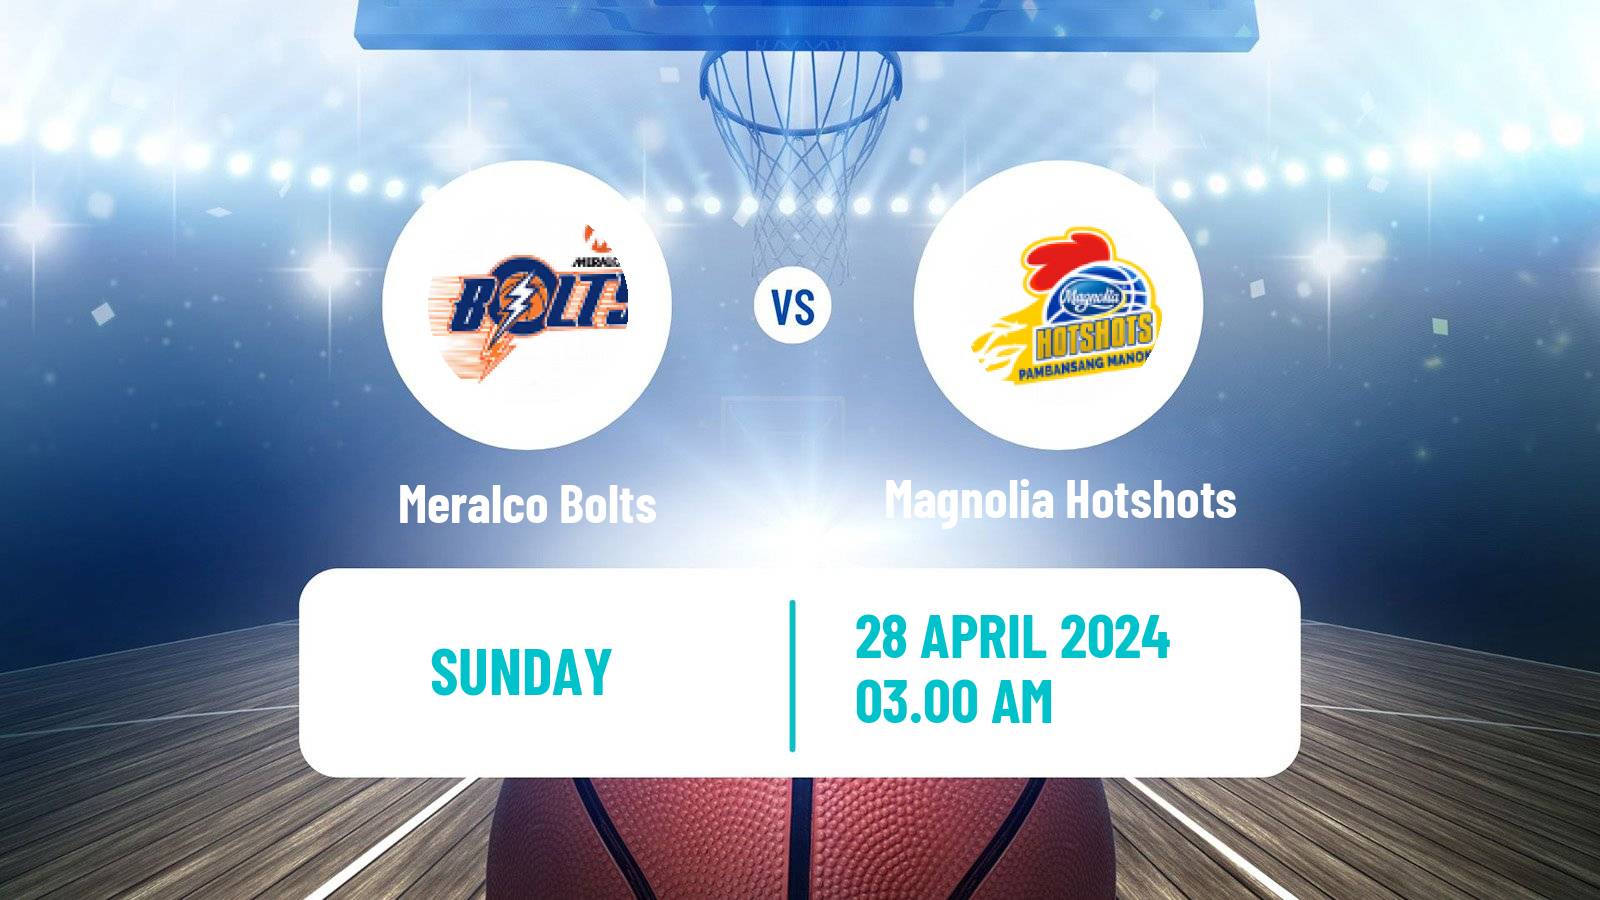 Basketball Philippines Cup Meralco Bolts - Magnolia Hotshots